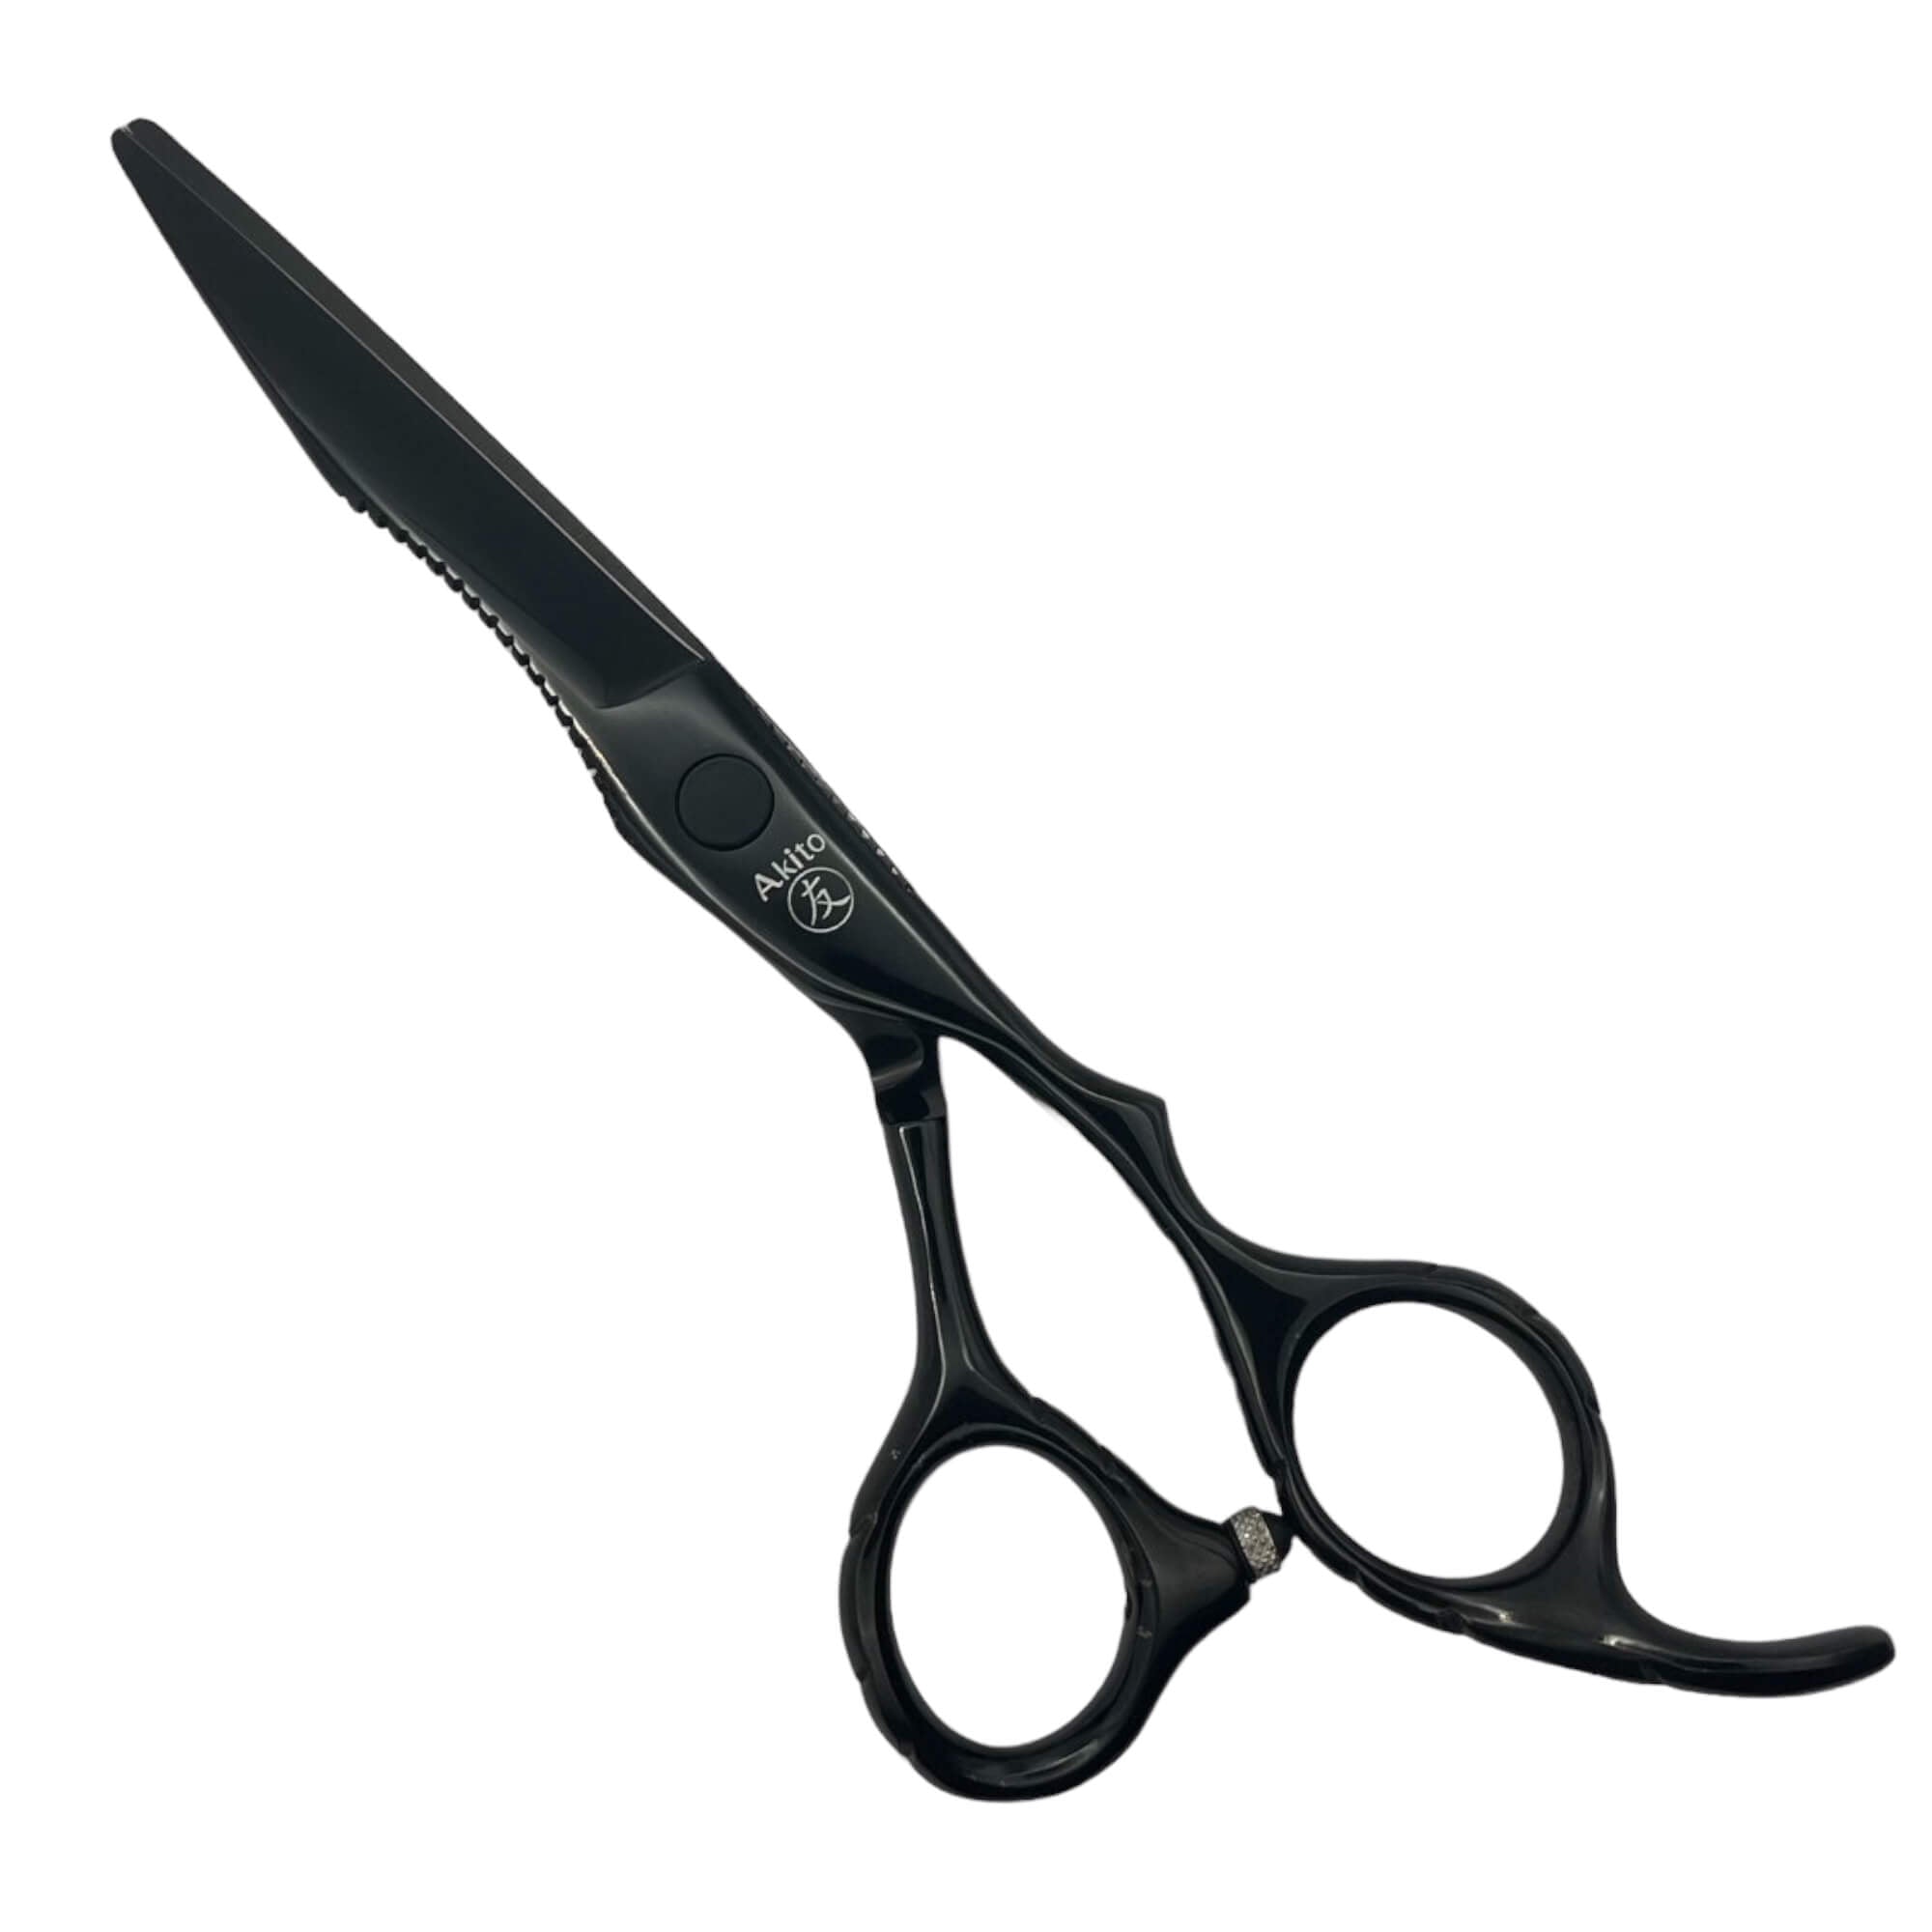  Jieotwice Professional Hairdressing scissors Grinding